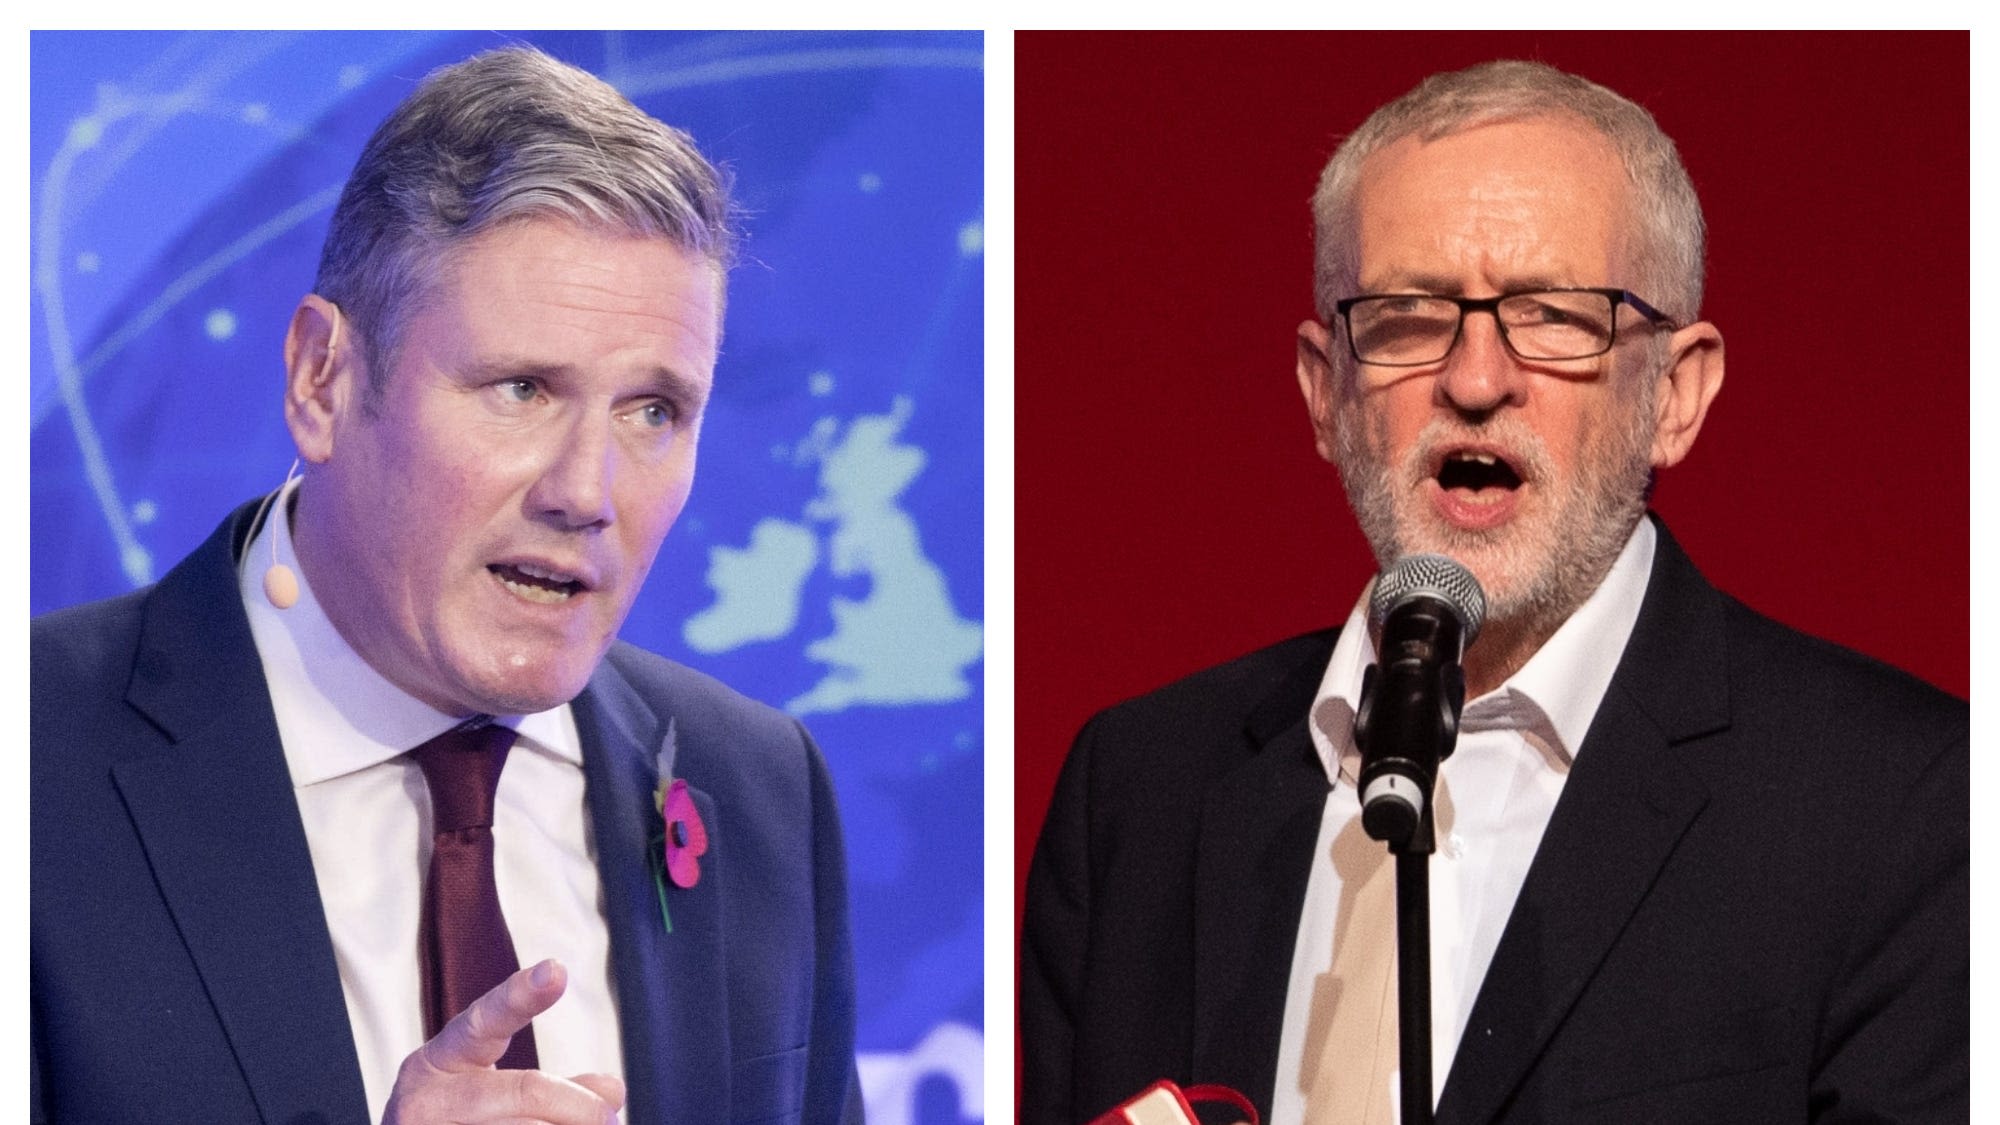 Jeremy Corbyn’s days of influencing Labour are over, says Sir Keir Starmer